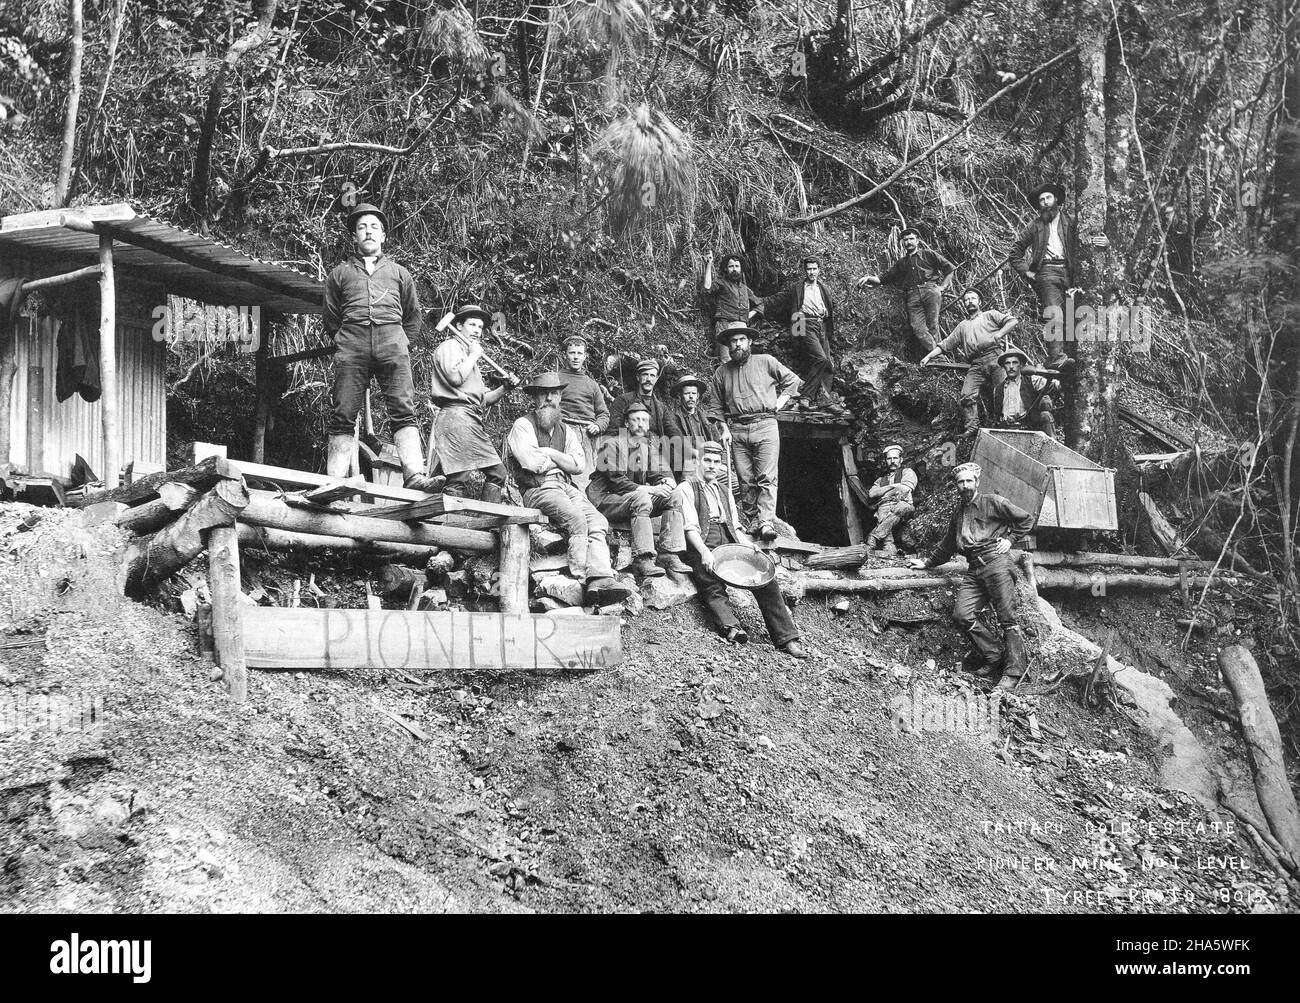 A group of 17 miners at the Pionerr Gold Mine at the Tai Tapu Gold Estate near Golden Bay, New Zealand, circa 1895. A corrugated iron shelter is at left. Stock Photo